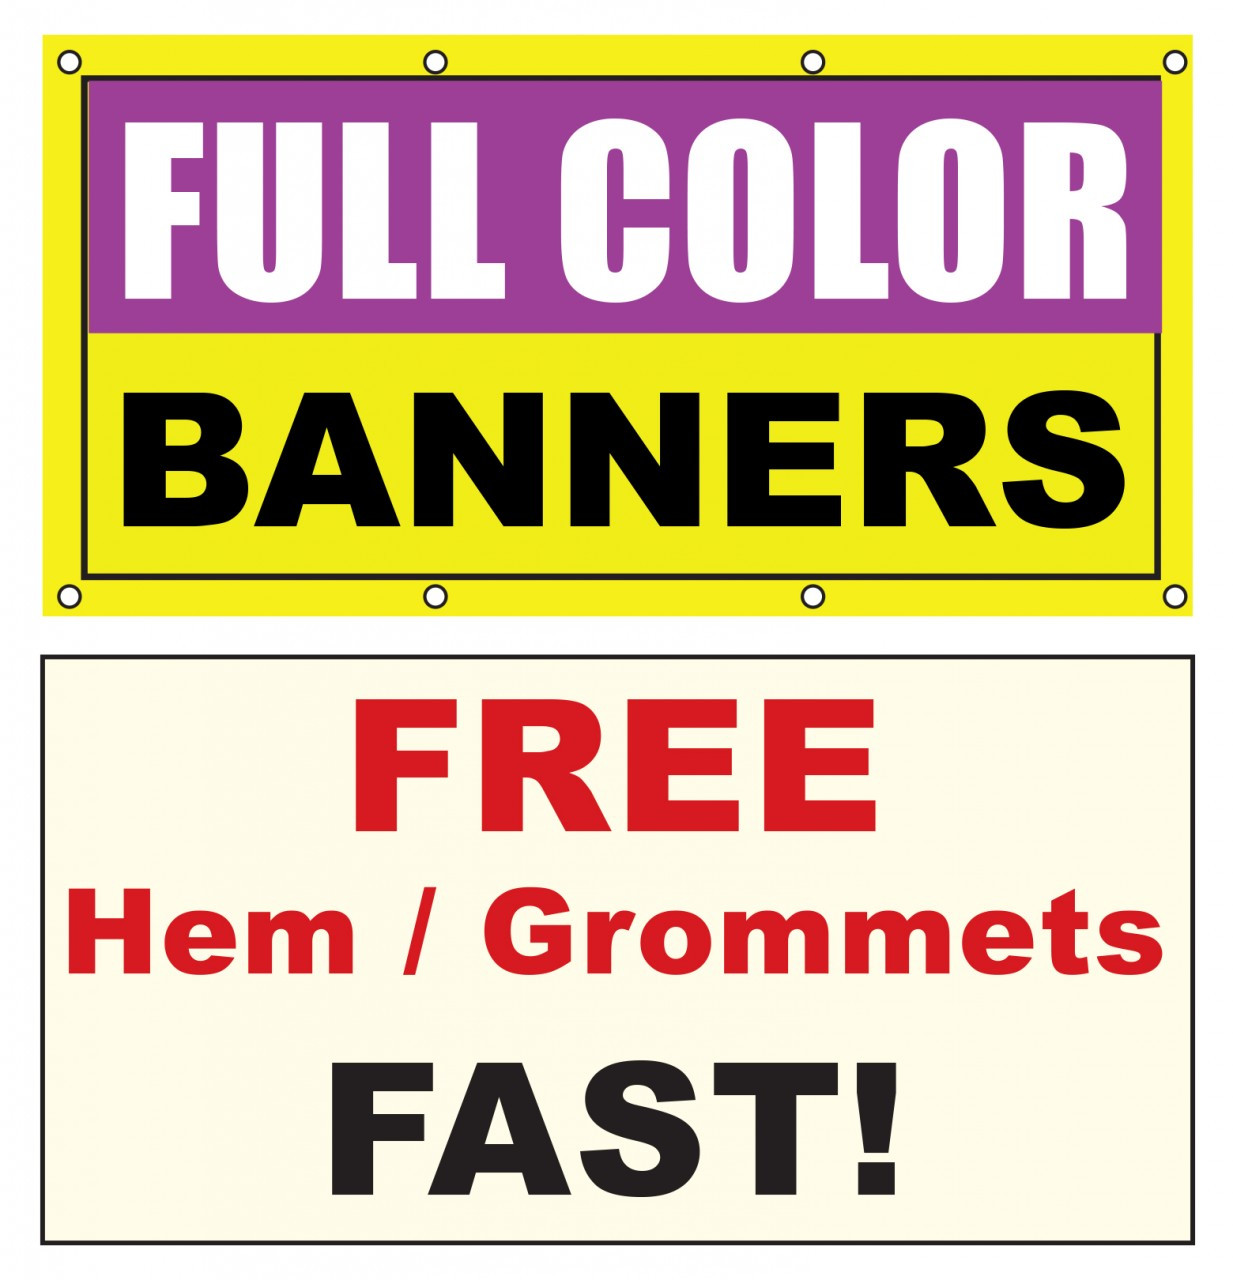 2' X 4' VINYL BANNER FUNNY TAILORING ALTERATIONS SEAMSTRESS BANNER BIG SIGN 